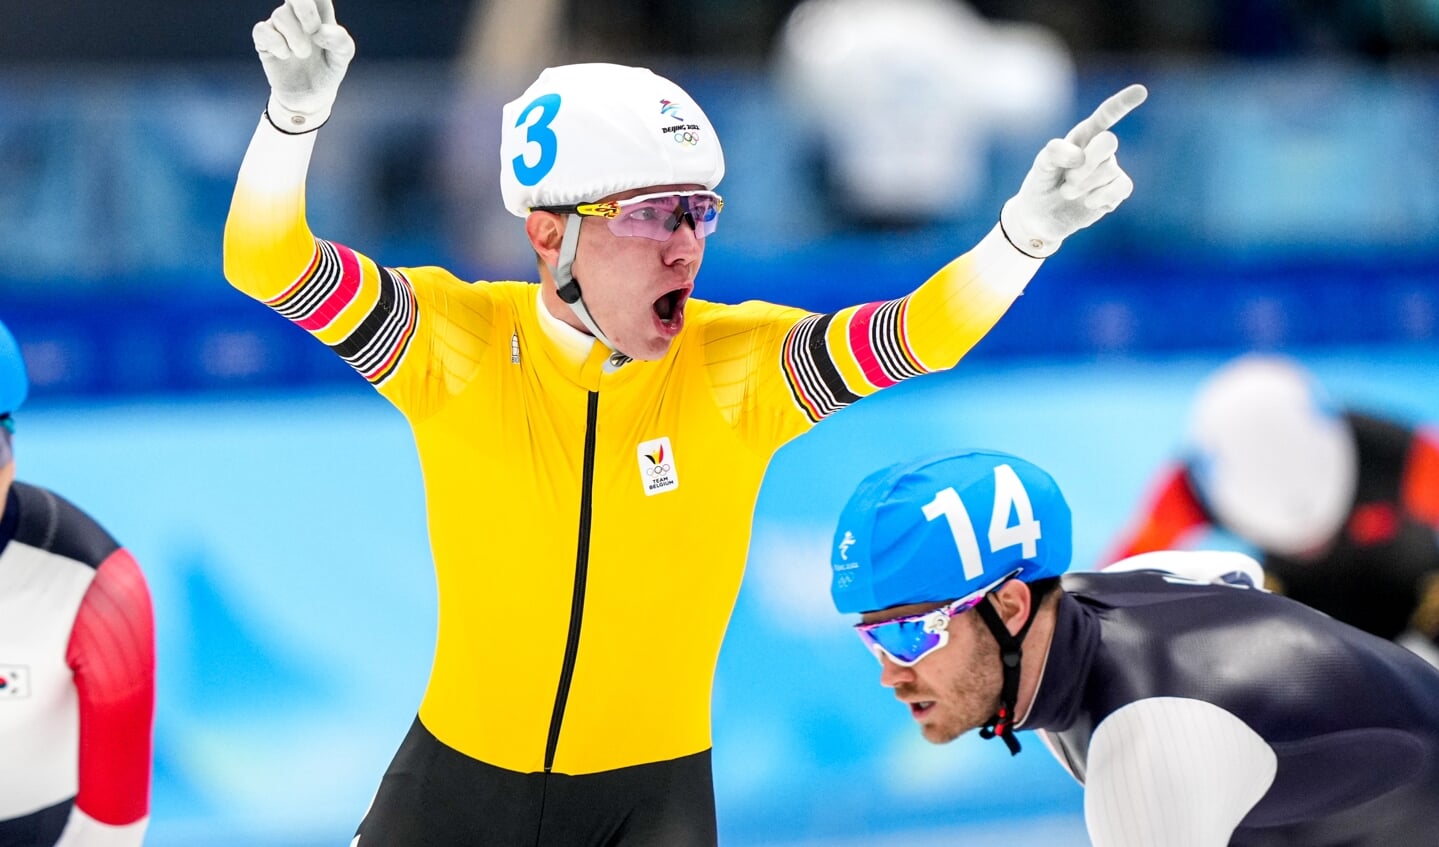 BEIJING, CHINA - FEBRUARY 19: Bart Swings of Belgium celebrating competing on the Men's Mass Start Final during the Beijing 2022 Olympic Games at the National Speed Skating Oval on February 19, 2022 in Beijing, China (Photo by Douwe Bijlmsa/Orange Pictures) NOCNSF